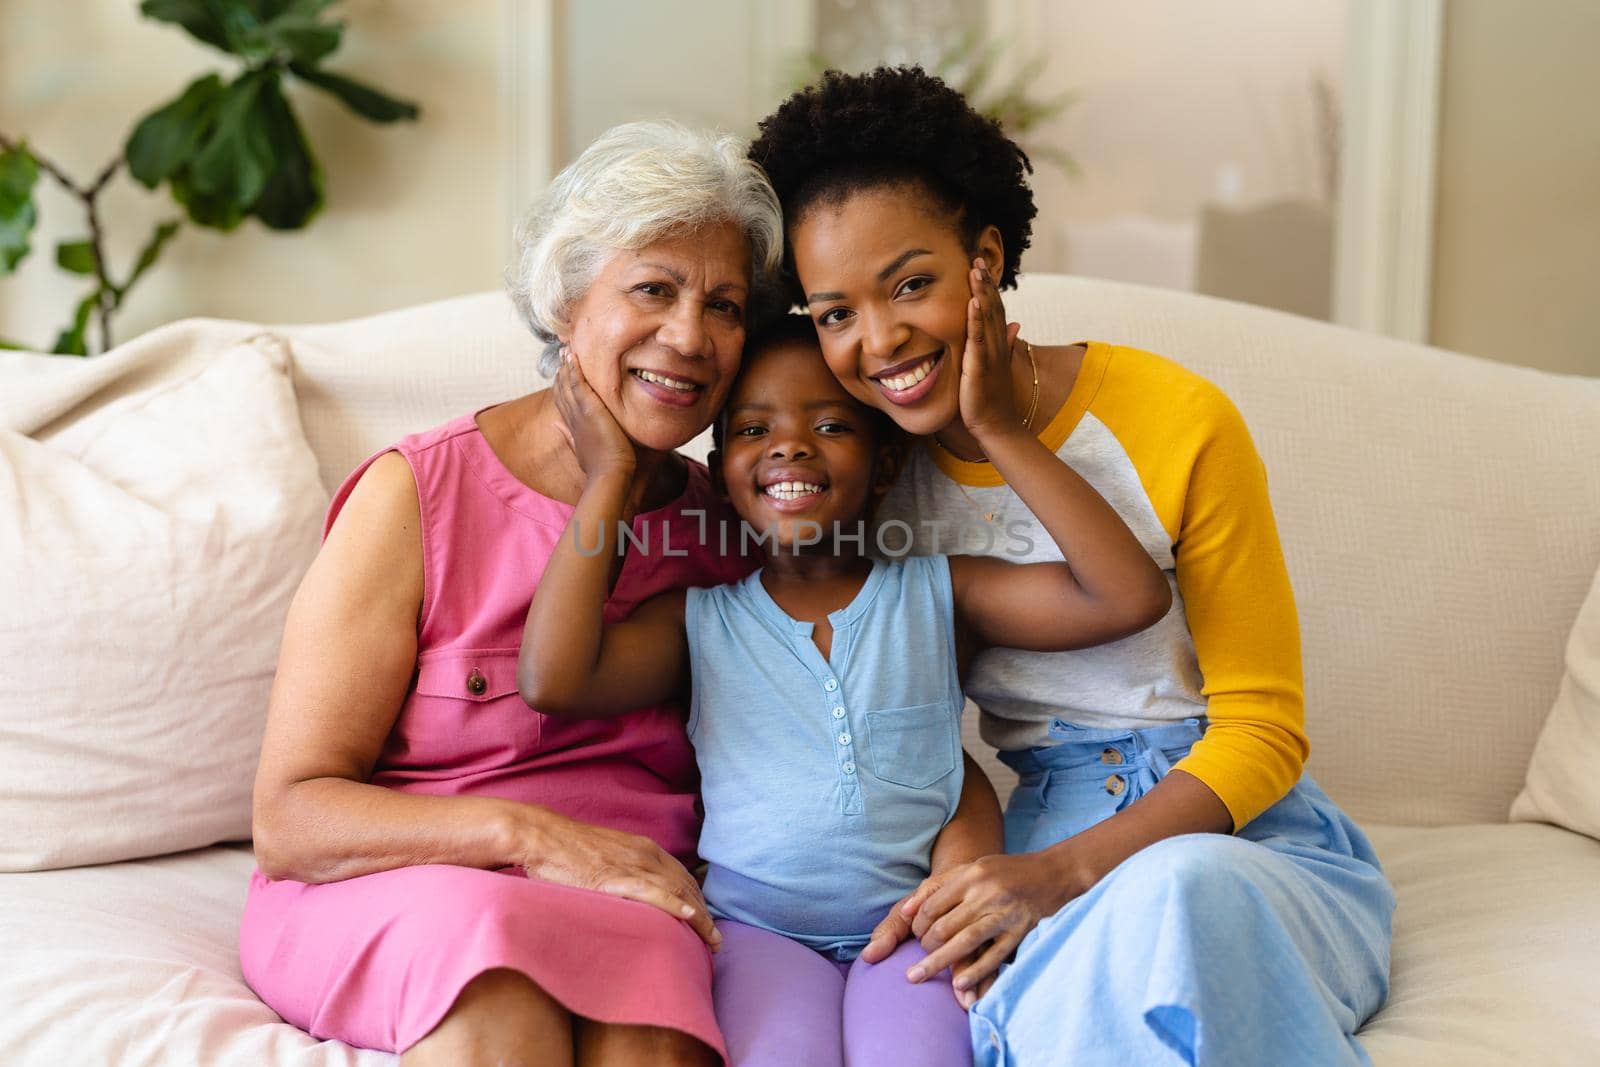 Portrait of african american grandmother, mother and granddaughter smiling sitting on couch at home. family, love and togetherness concept, unaltered.